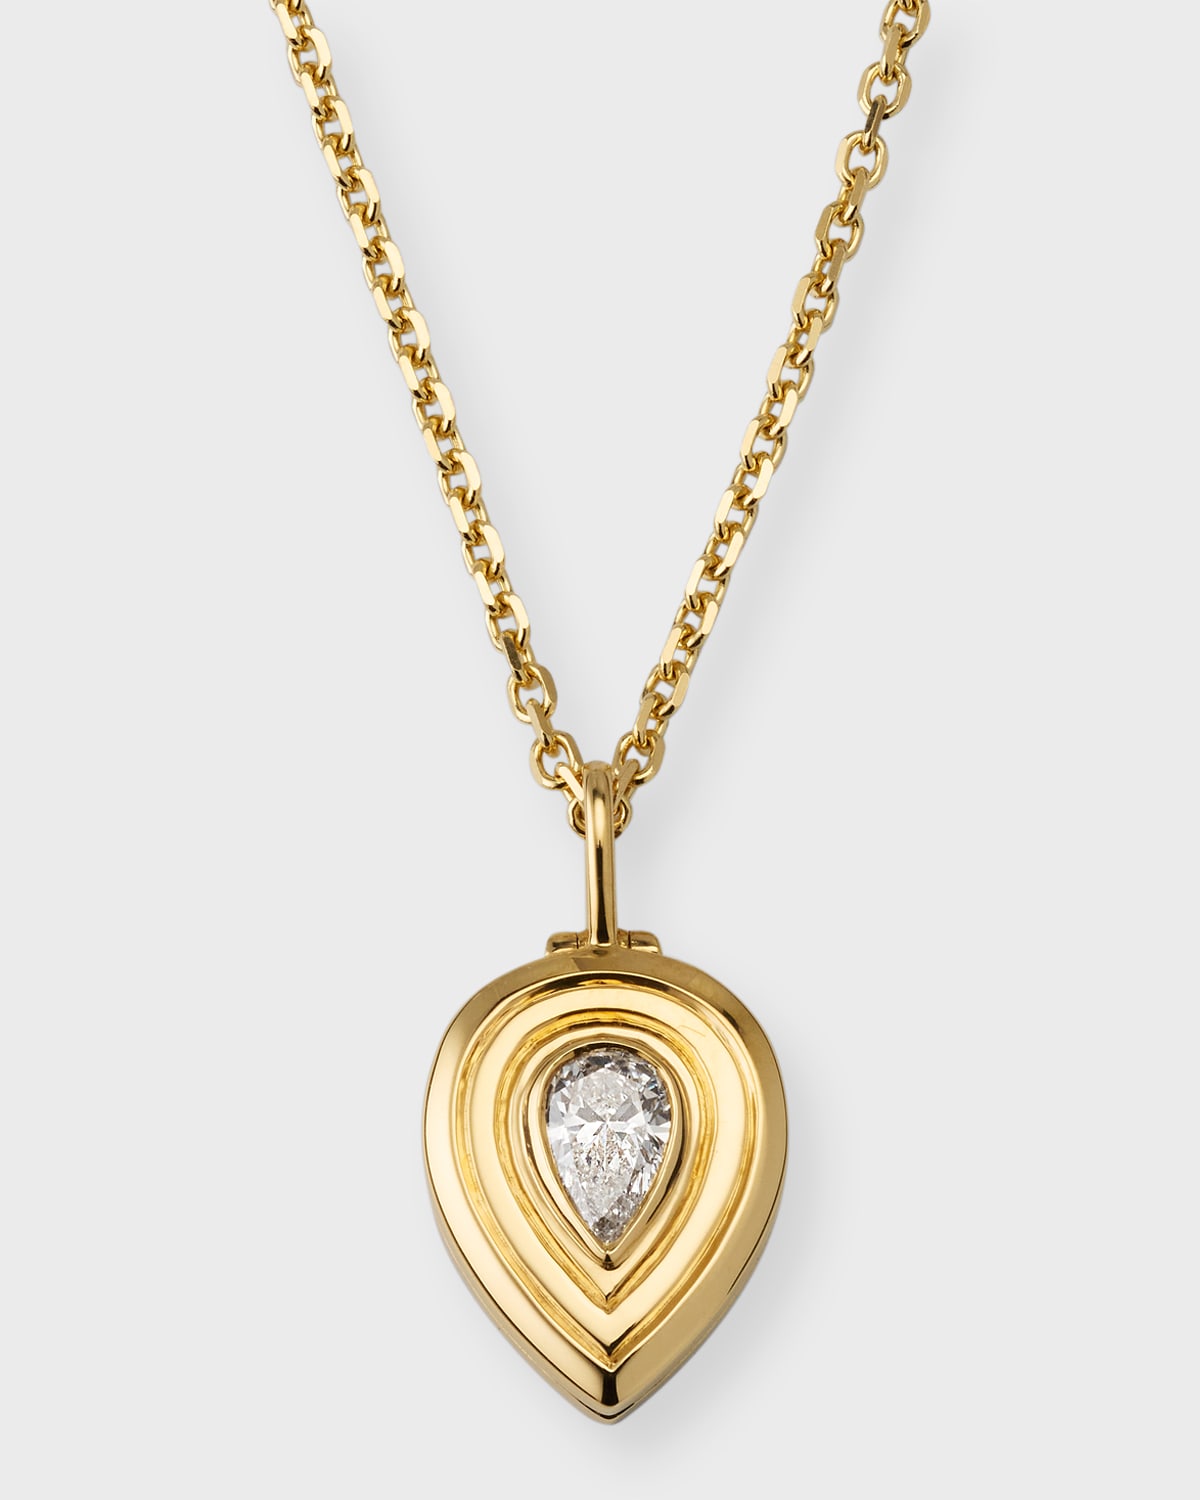 18K Yellow Gold Loulou Locket Necklace with Pear Diamond